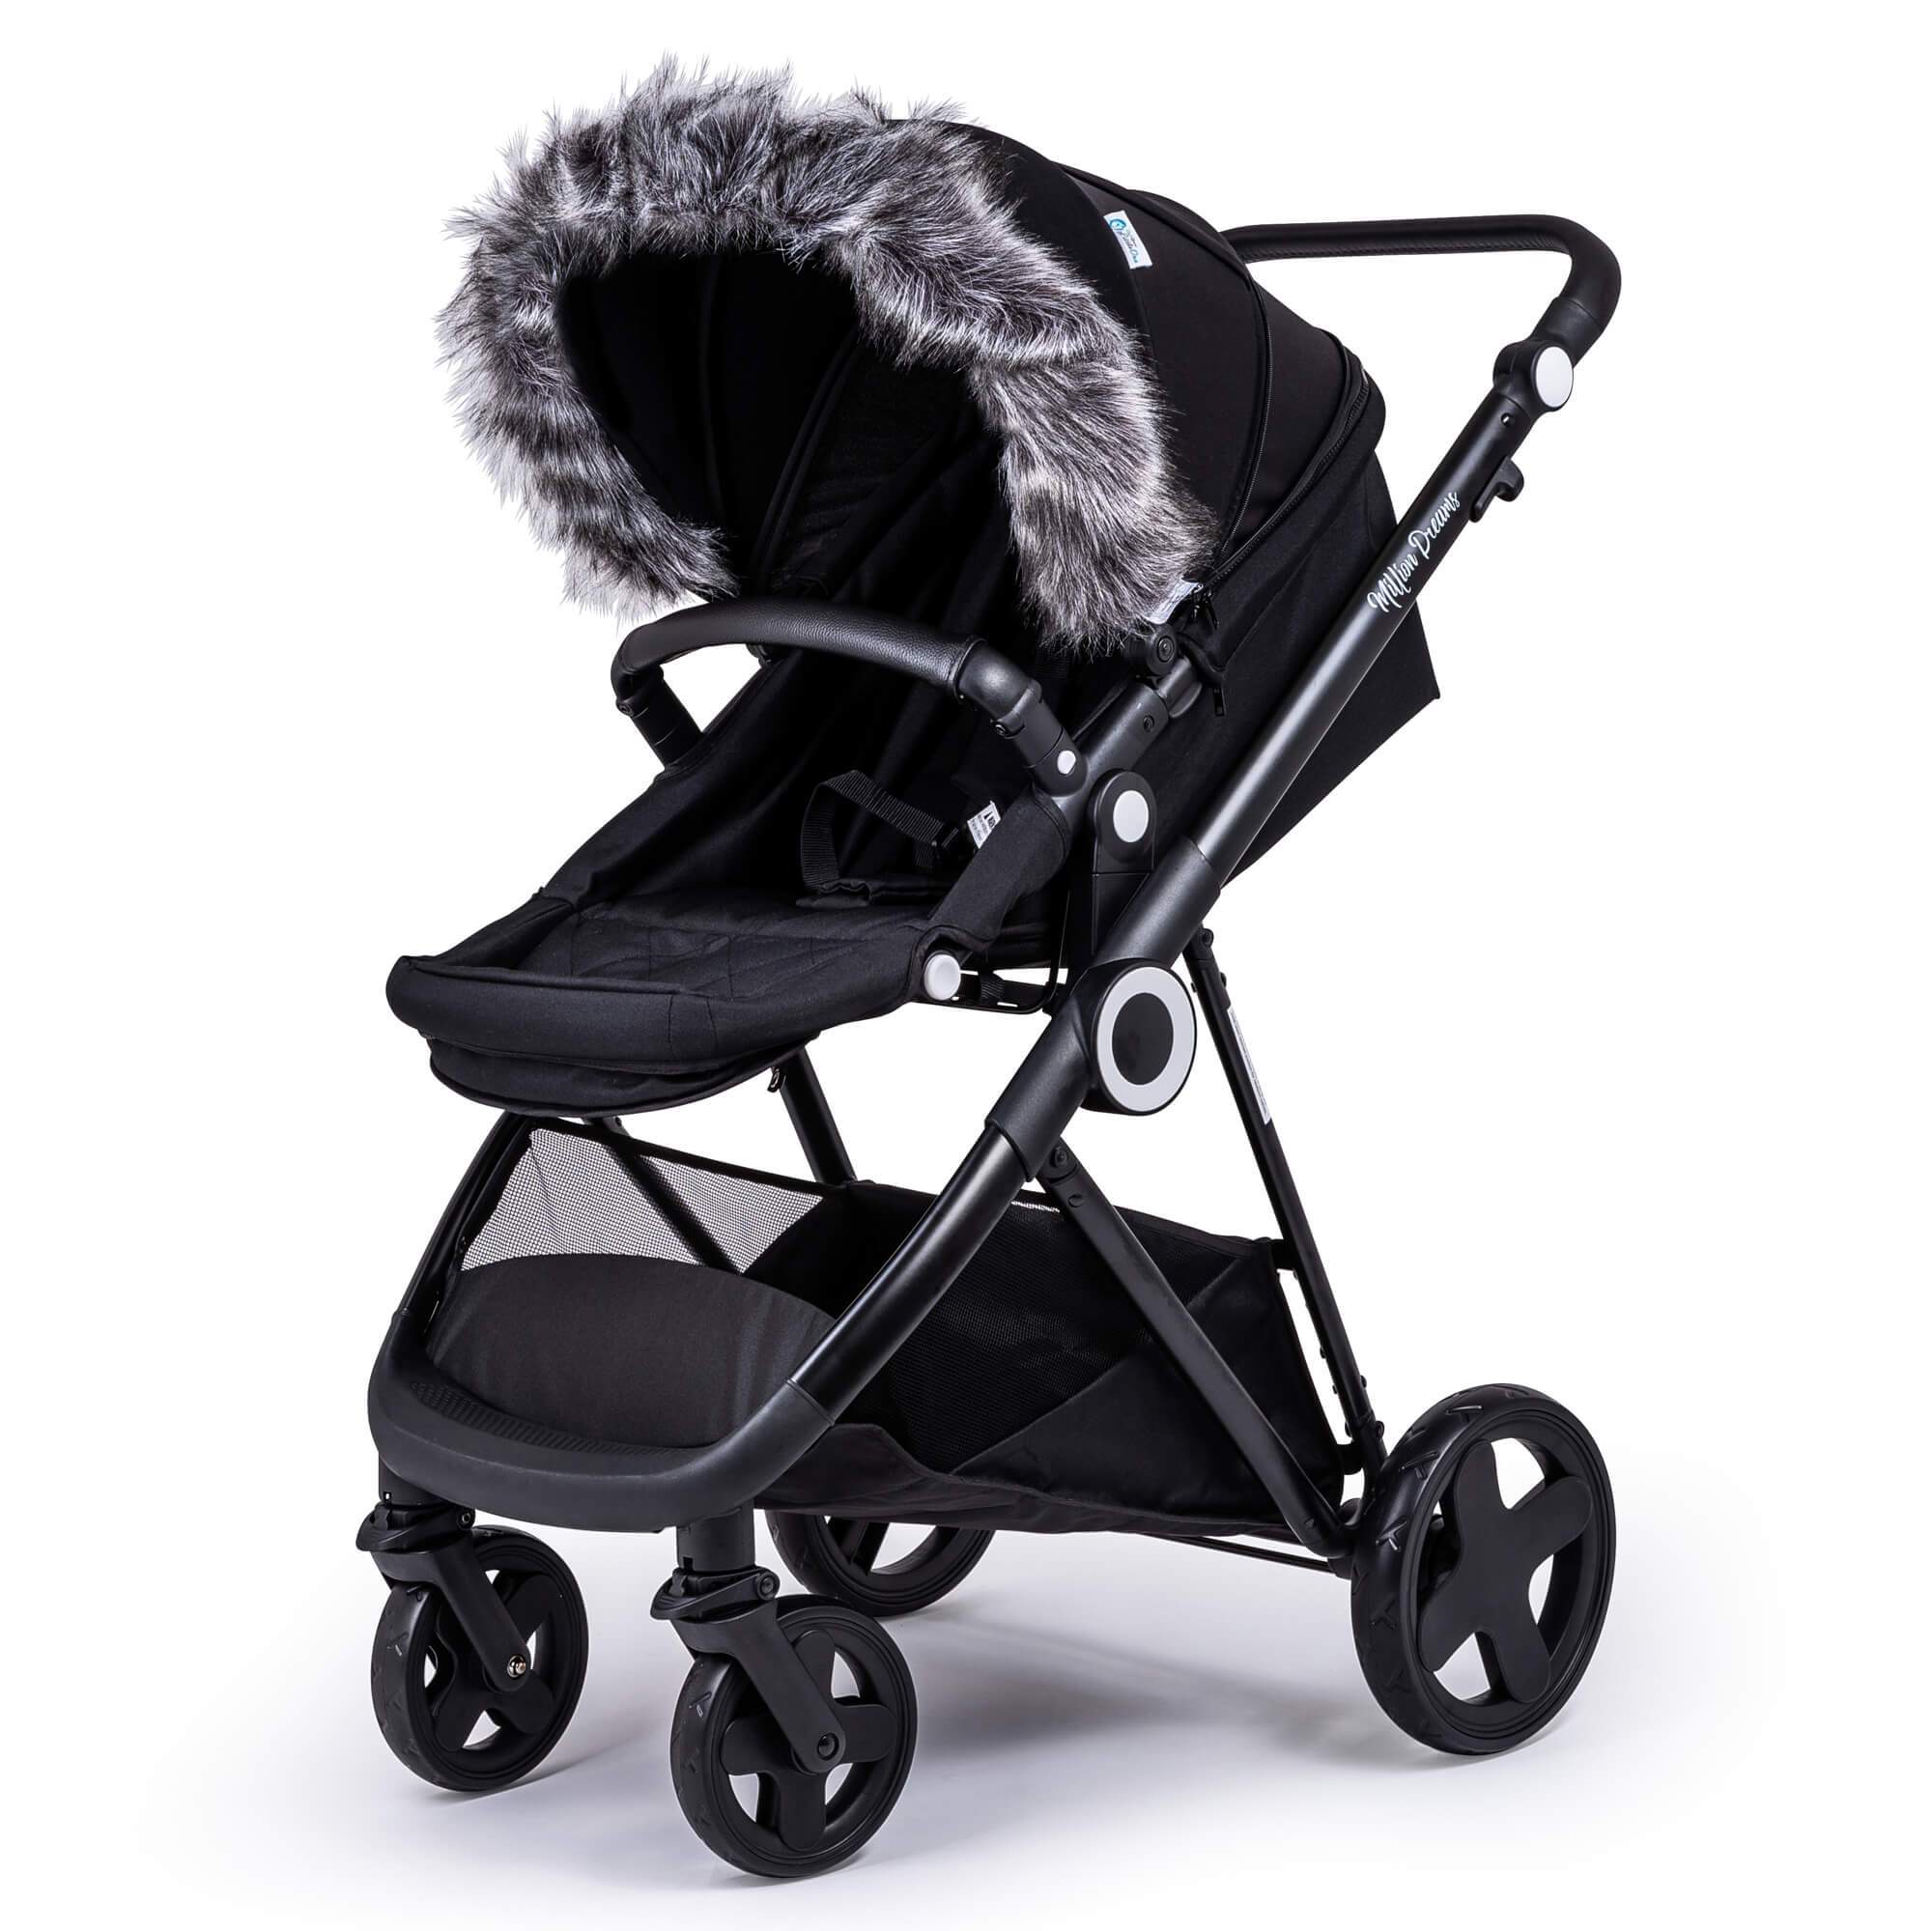 Pram Fur Hood Trim Attachment for Pushchair Compatible with XTS - Dark Grey / Fits All Models | For Your Little One